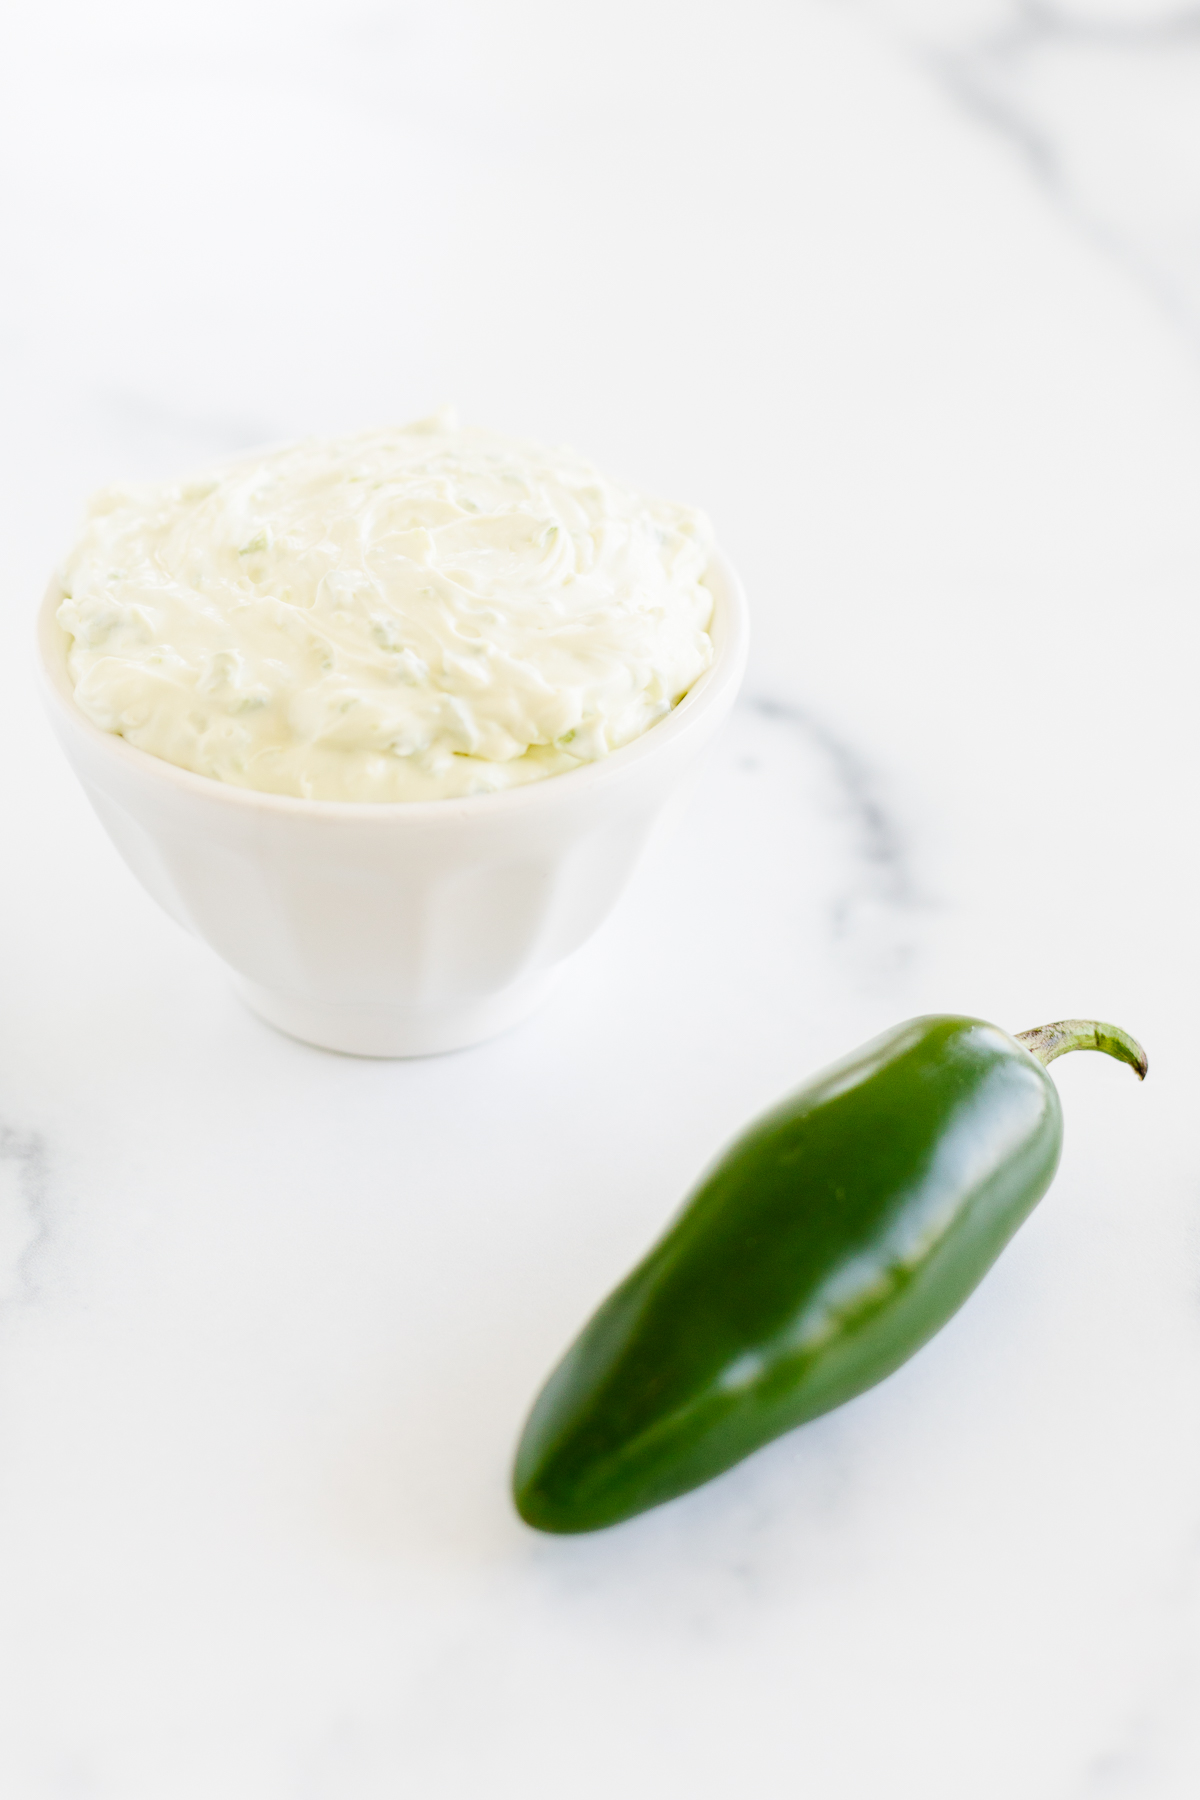 A white bowl with a jalapeno and a green pepper, alongside a dollop of cream cheese.